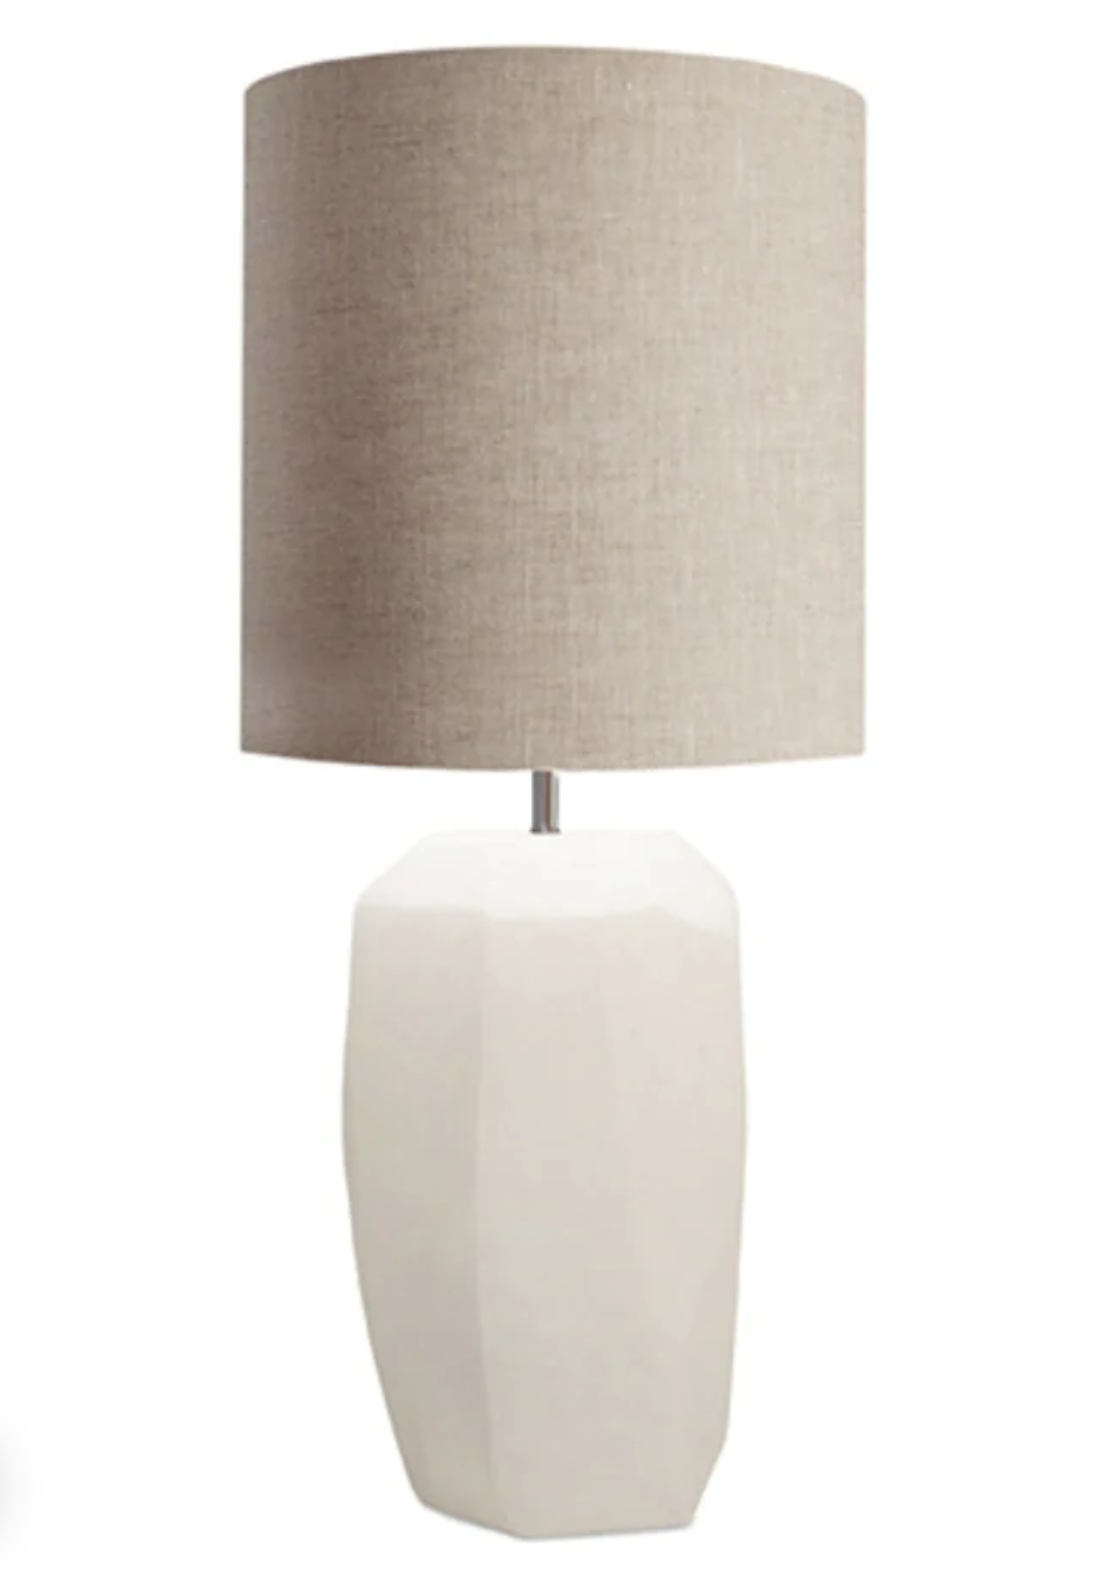 CUBISTIC TALL TABLELAMP | BY GUAXS FROM $1,645.00